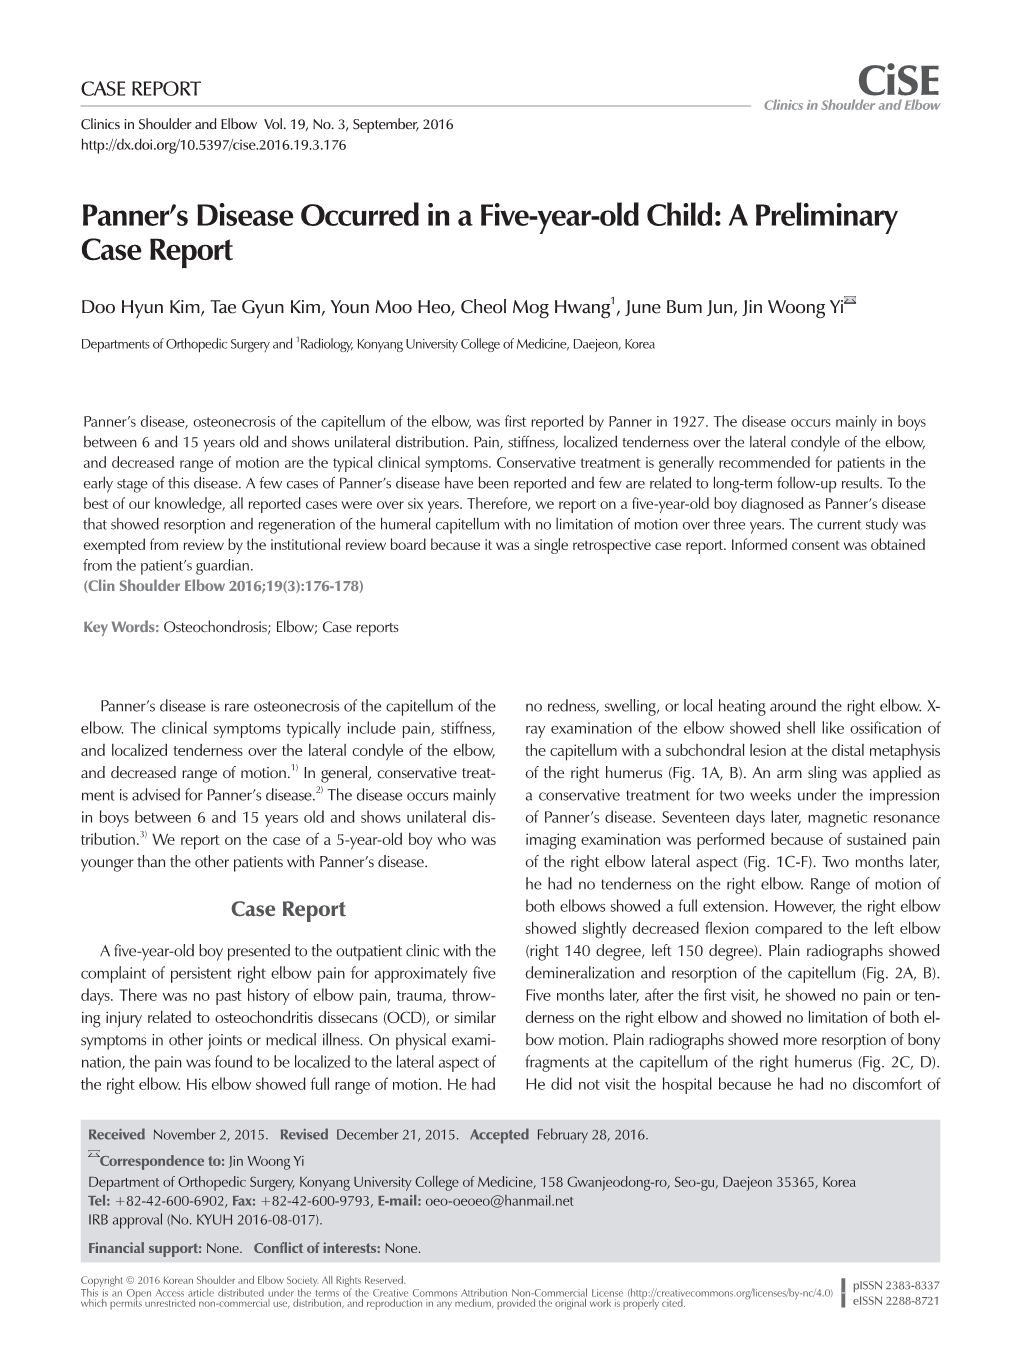 Panner's Disease Occurred in a Five-Year-Old